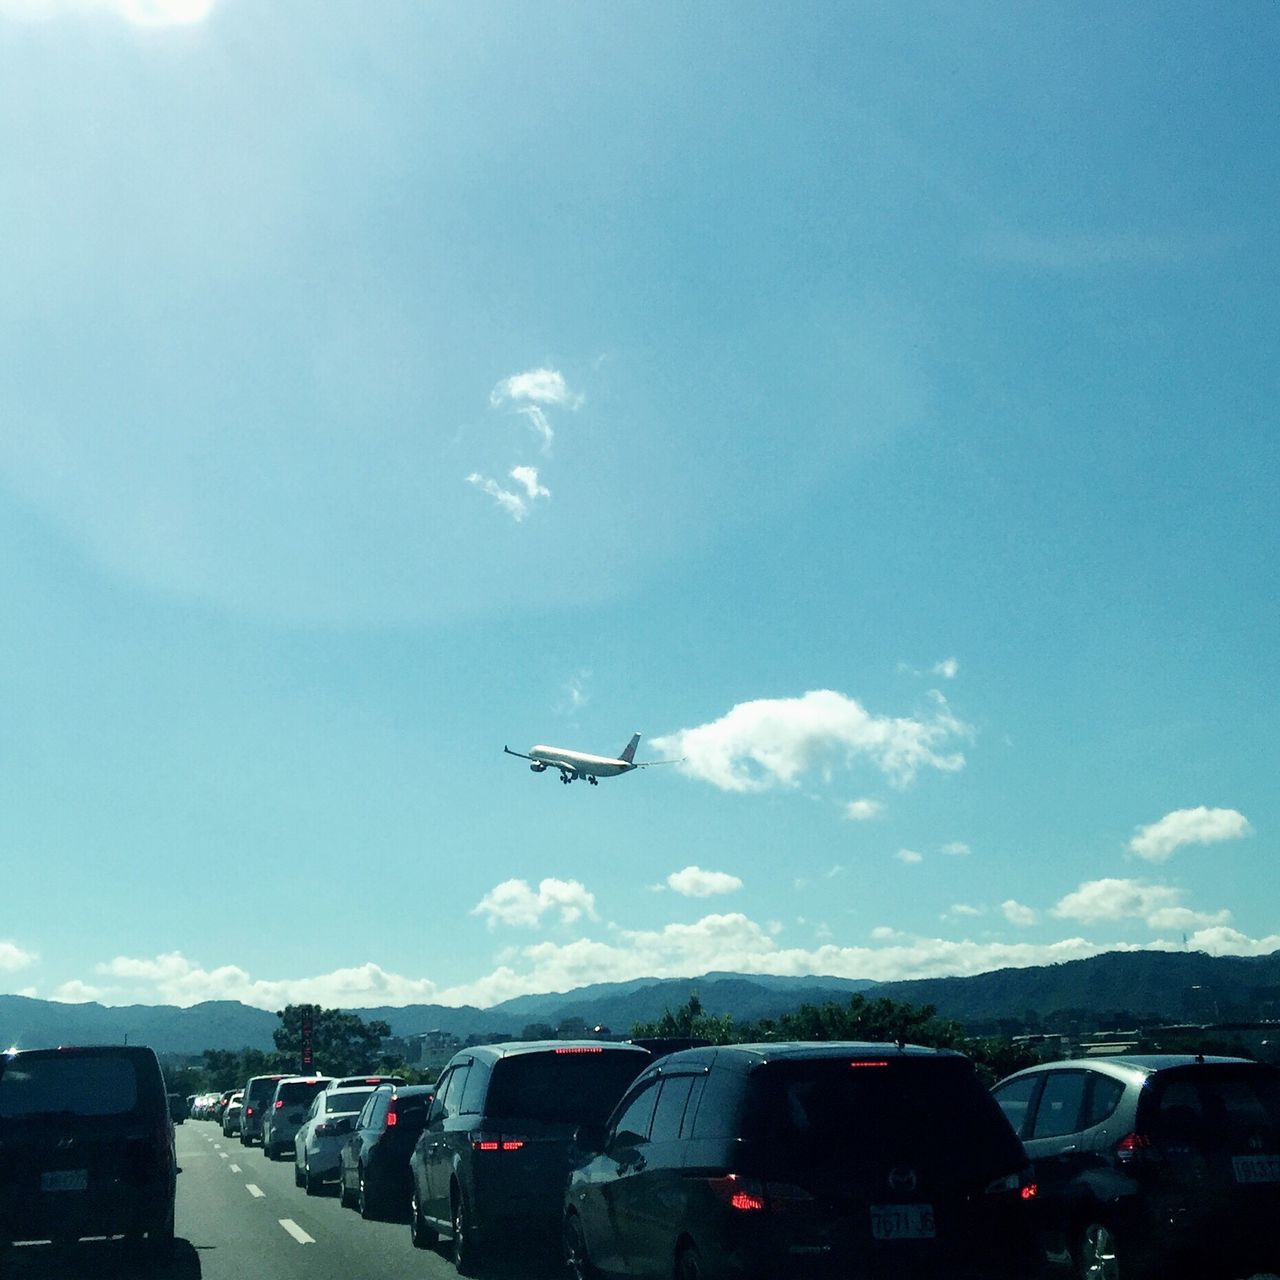 AIRPLANE FLYING OVER ROAD